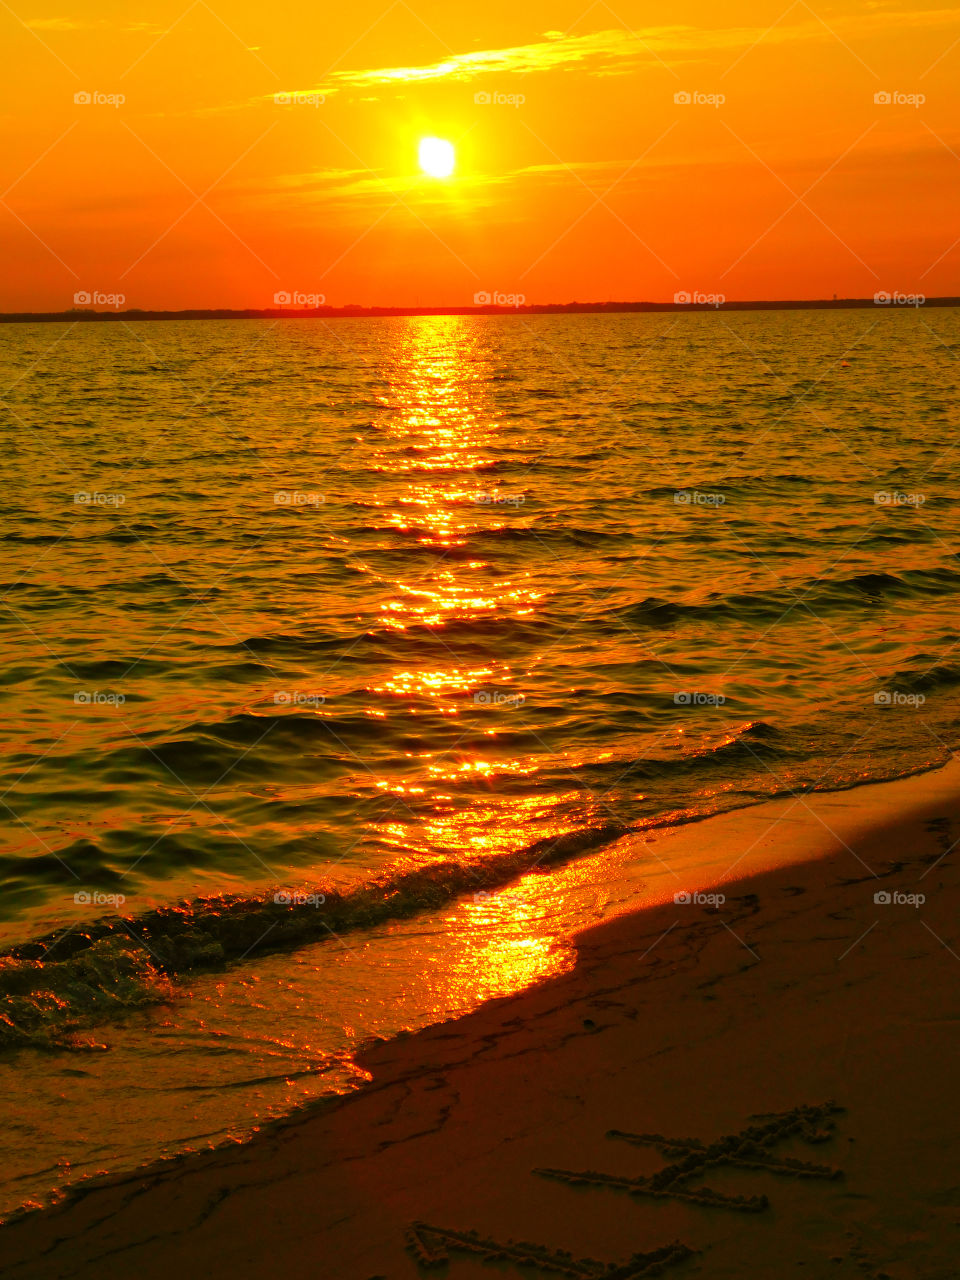 The sky was filled with the most brilliant orange complimented perfectly with hues of gold, yellow, red and crimson. An orange haze had casted over the water, reflecting off every wave.  Finally,the sun disappears along with the shine. I can only wait to see another magical moment of beauty and warmth! I can only wait for another sunset! Enjoy!